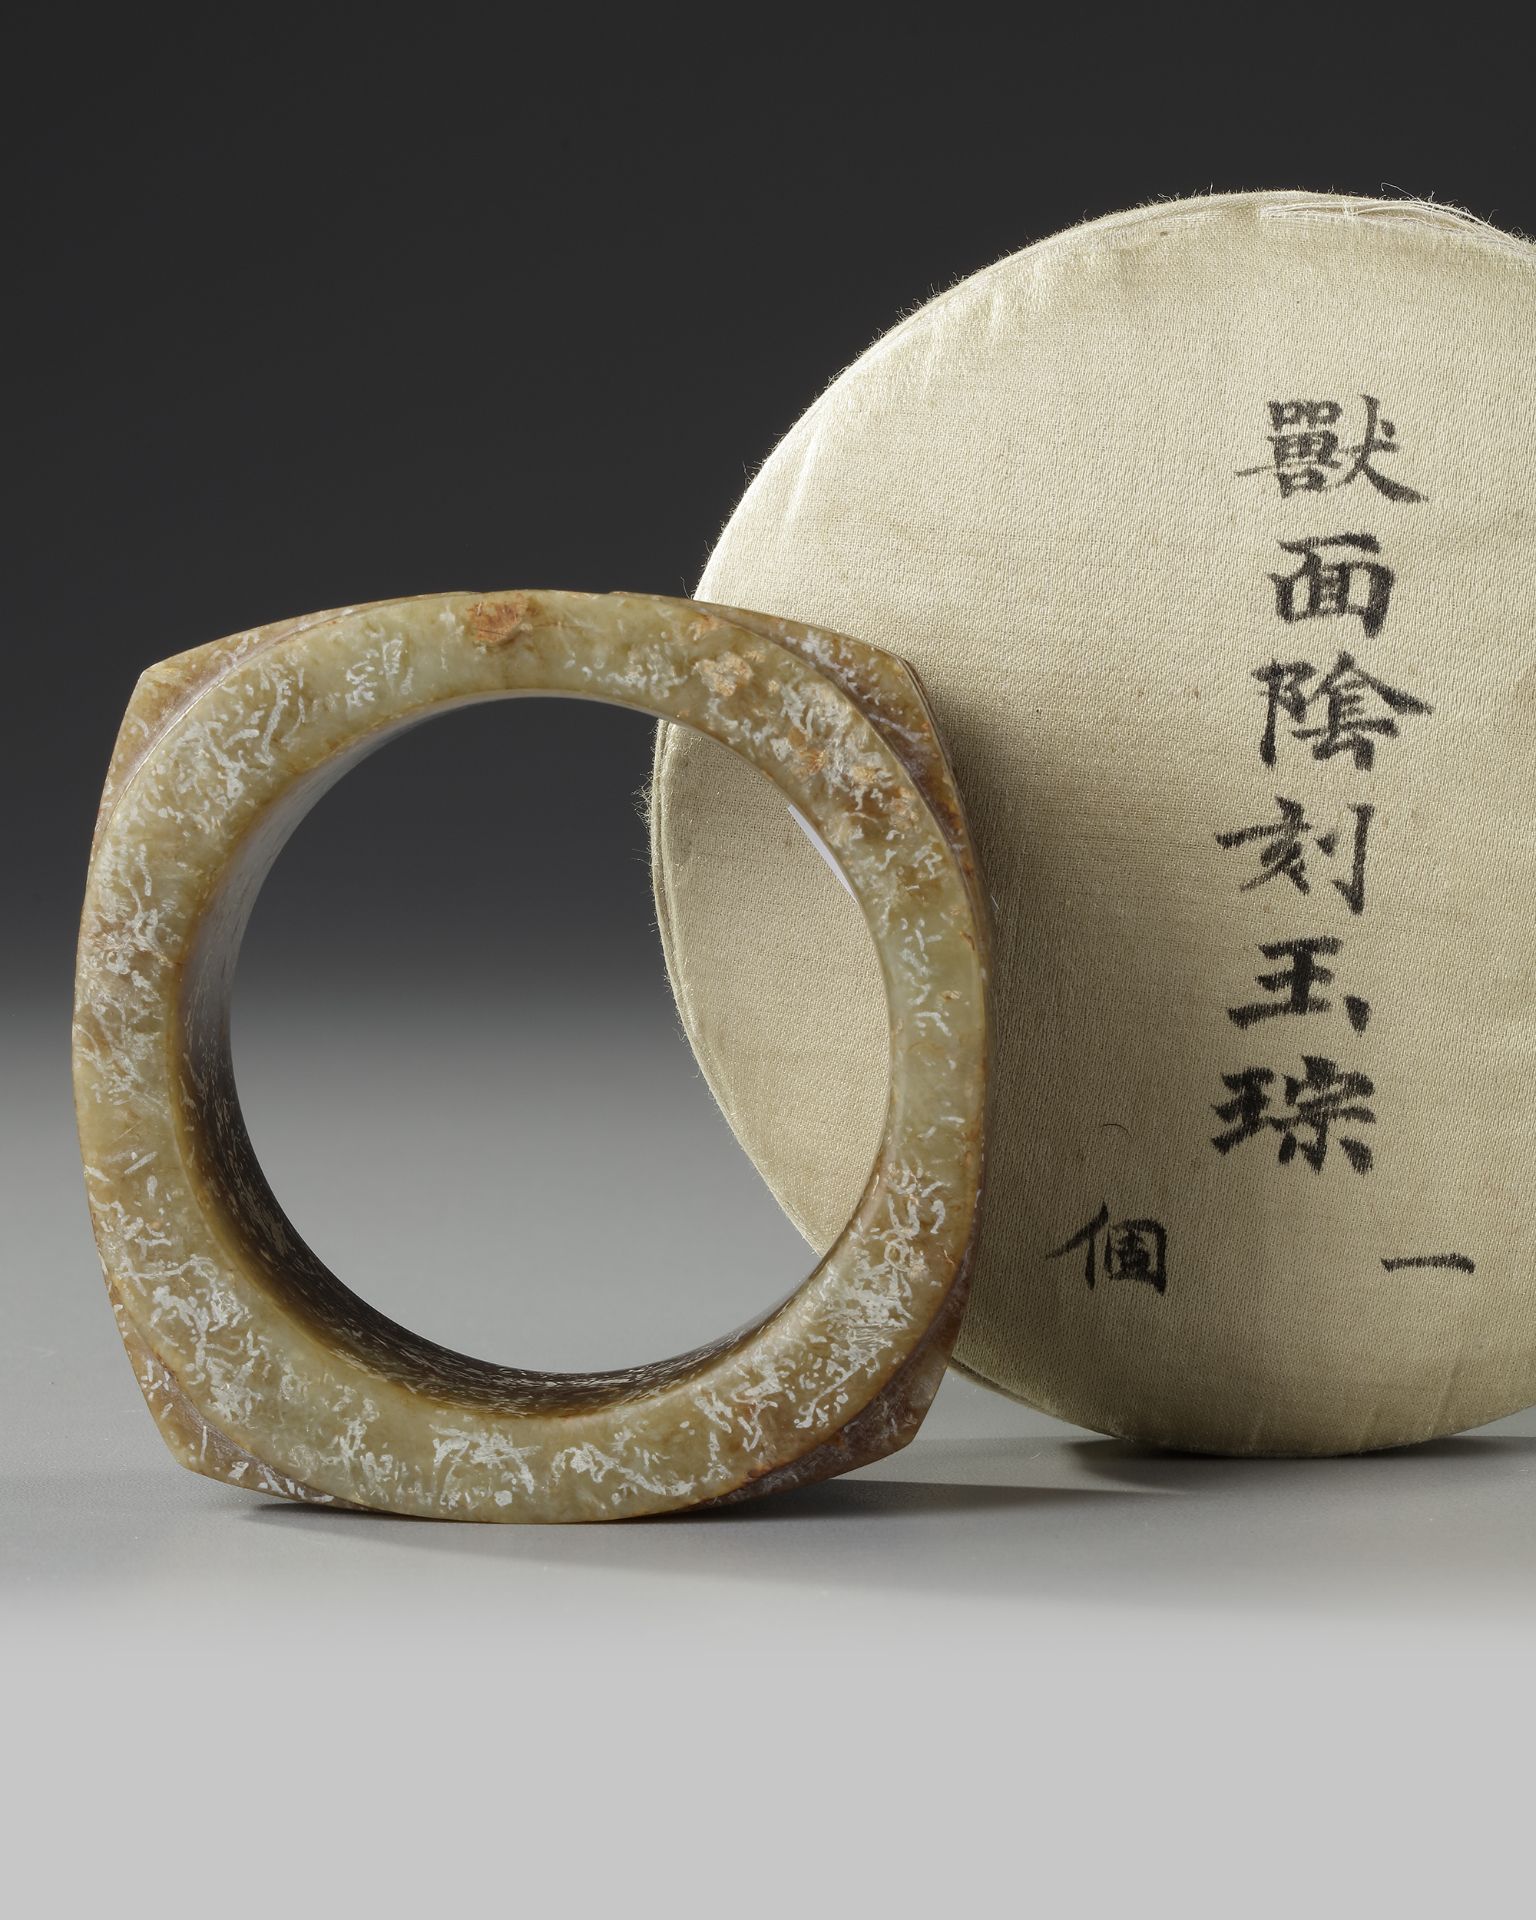 A LARGE ARCHAISTIC JADE CONG, MING DYNASTY (1368-1644) - Image 7 of 8